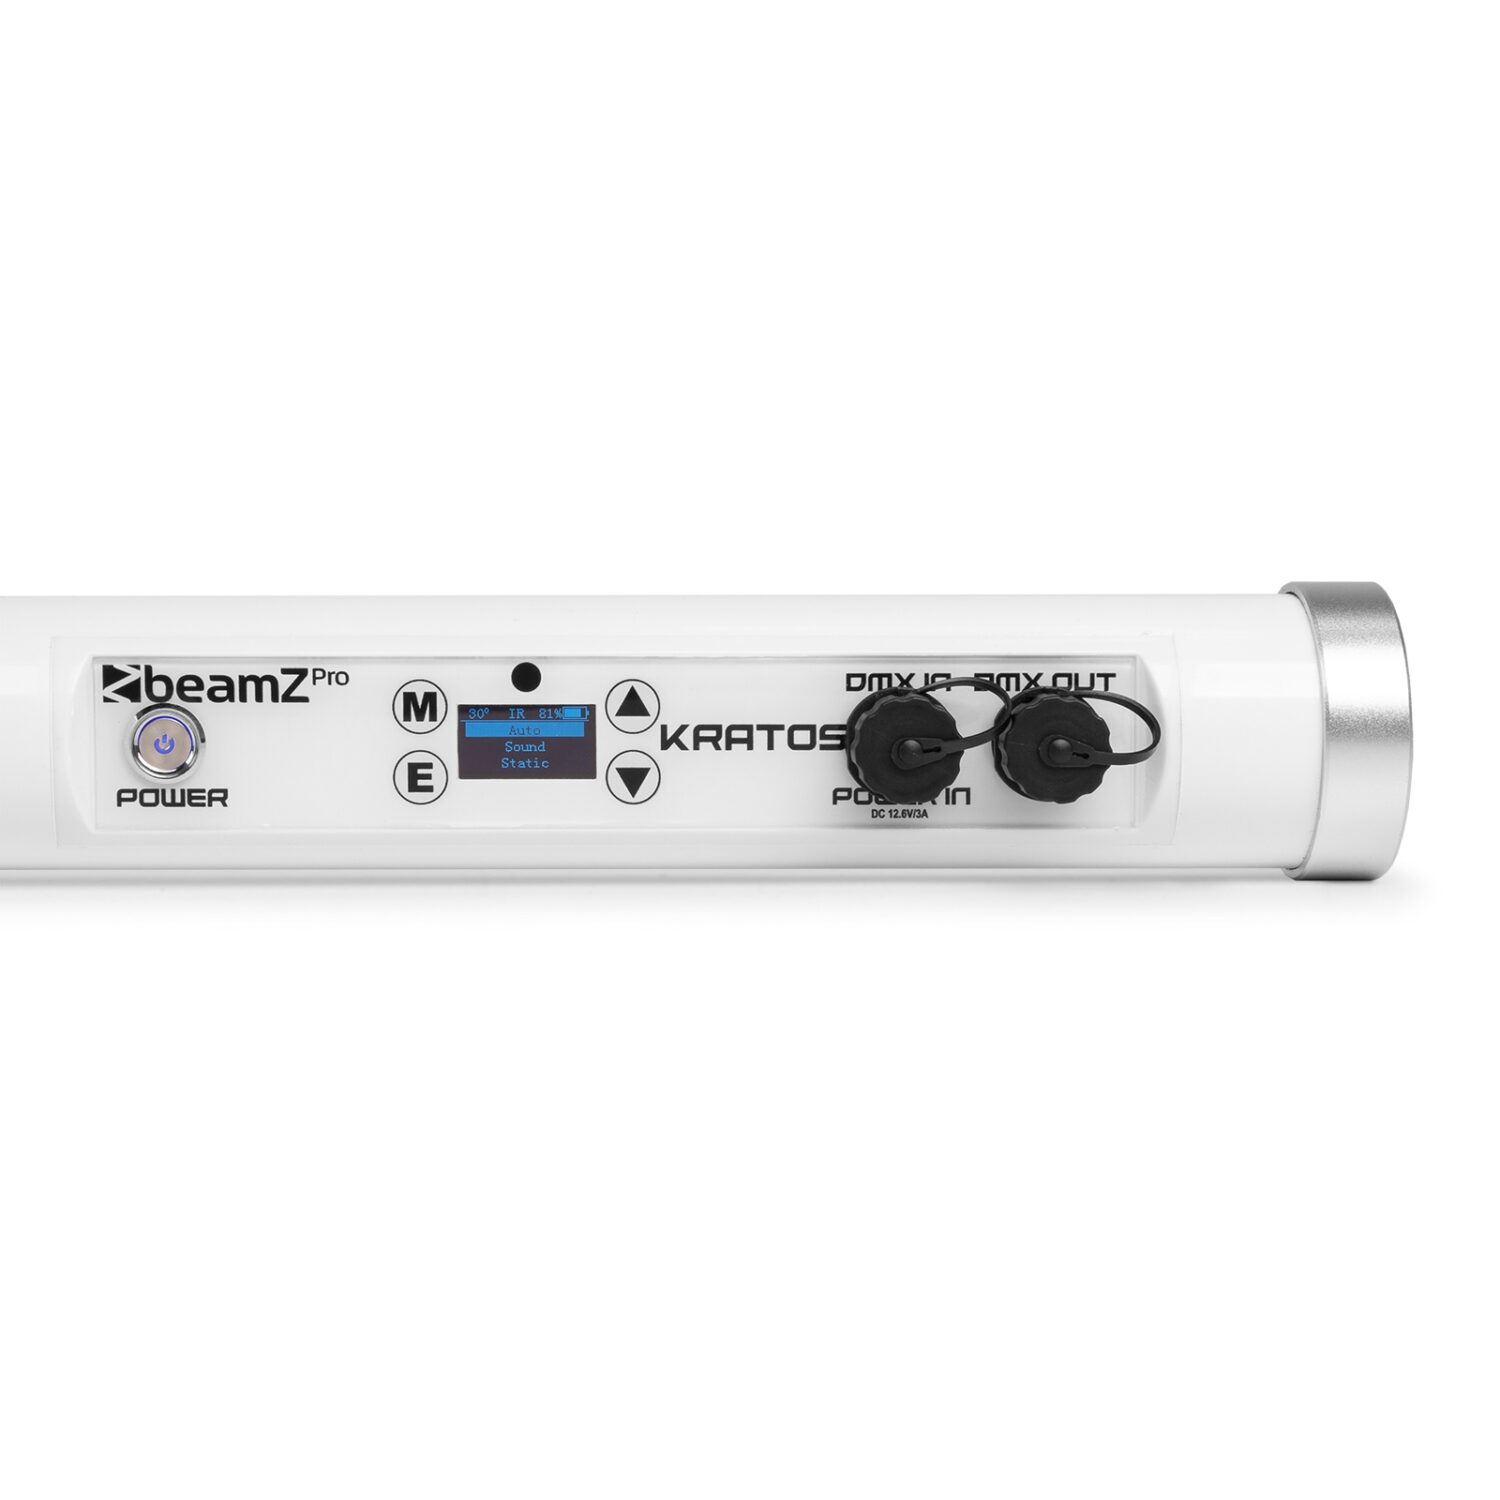 KRATOS LED TUBE RGBW IN/OUTDOOR USE beamZ Pro